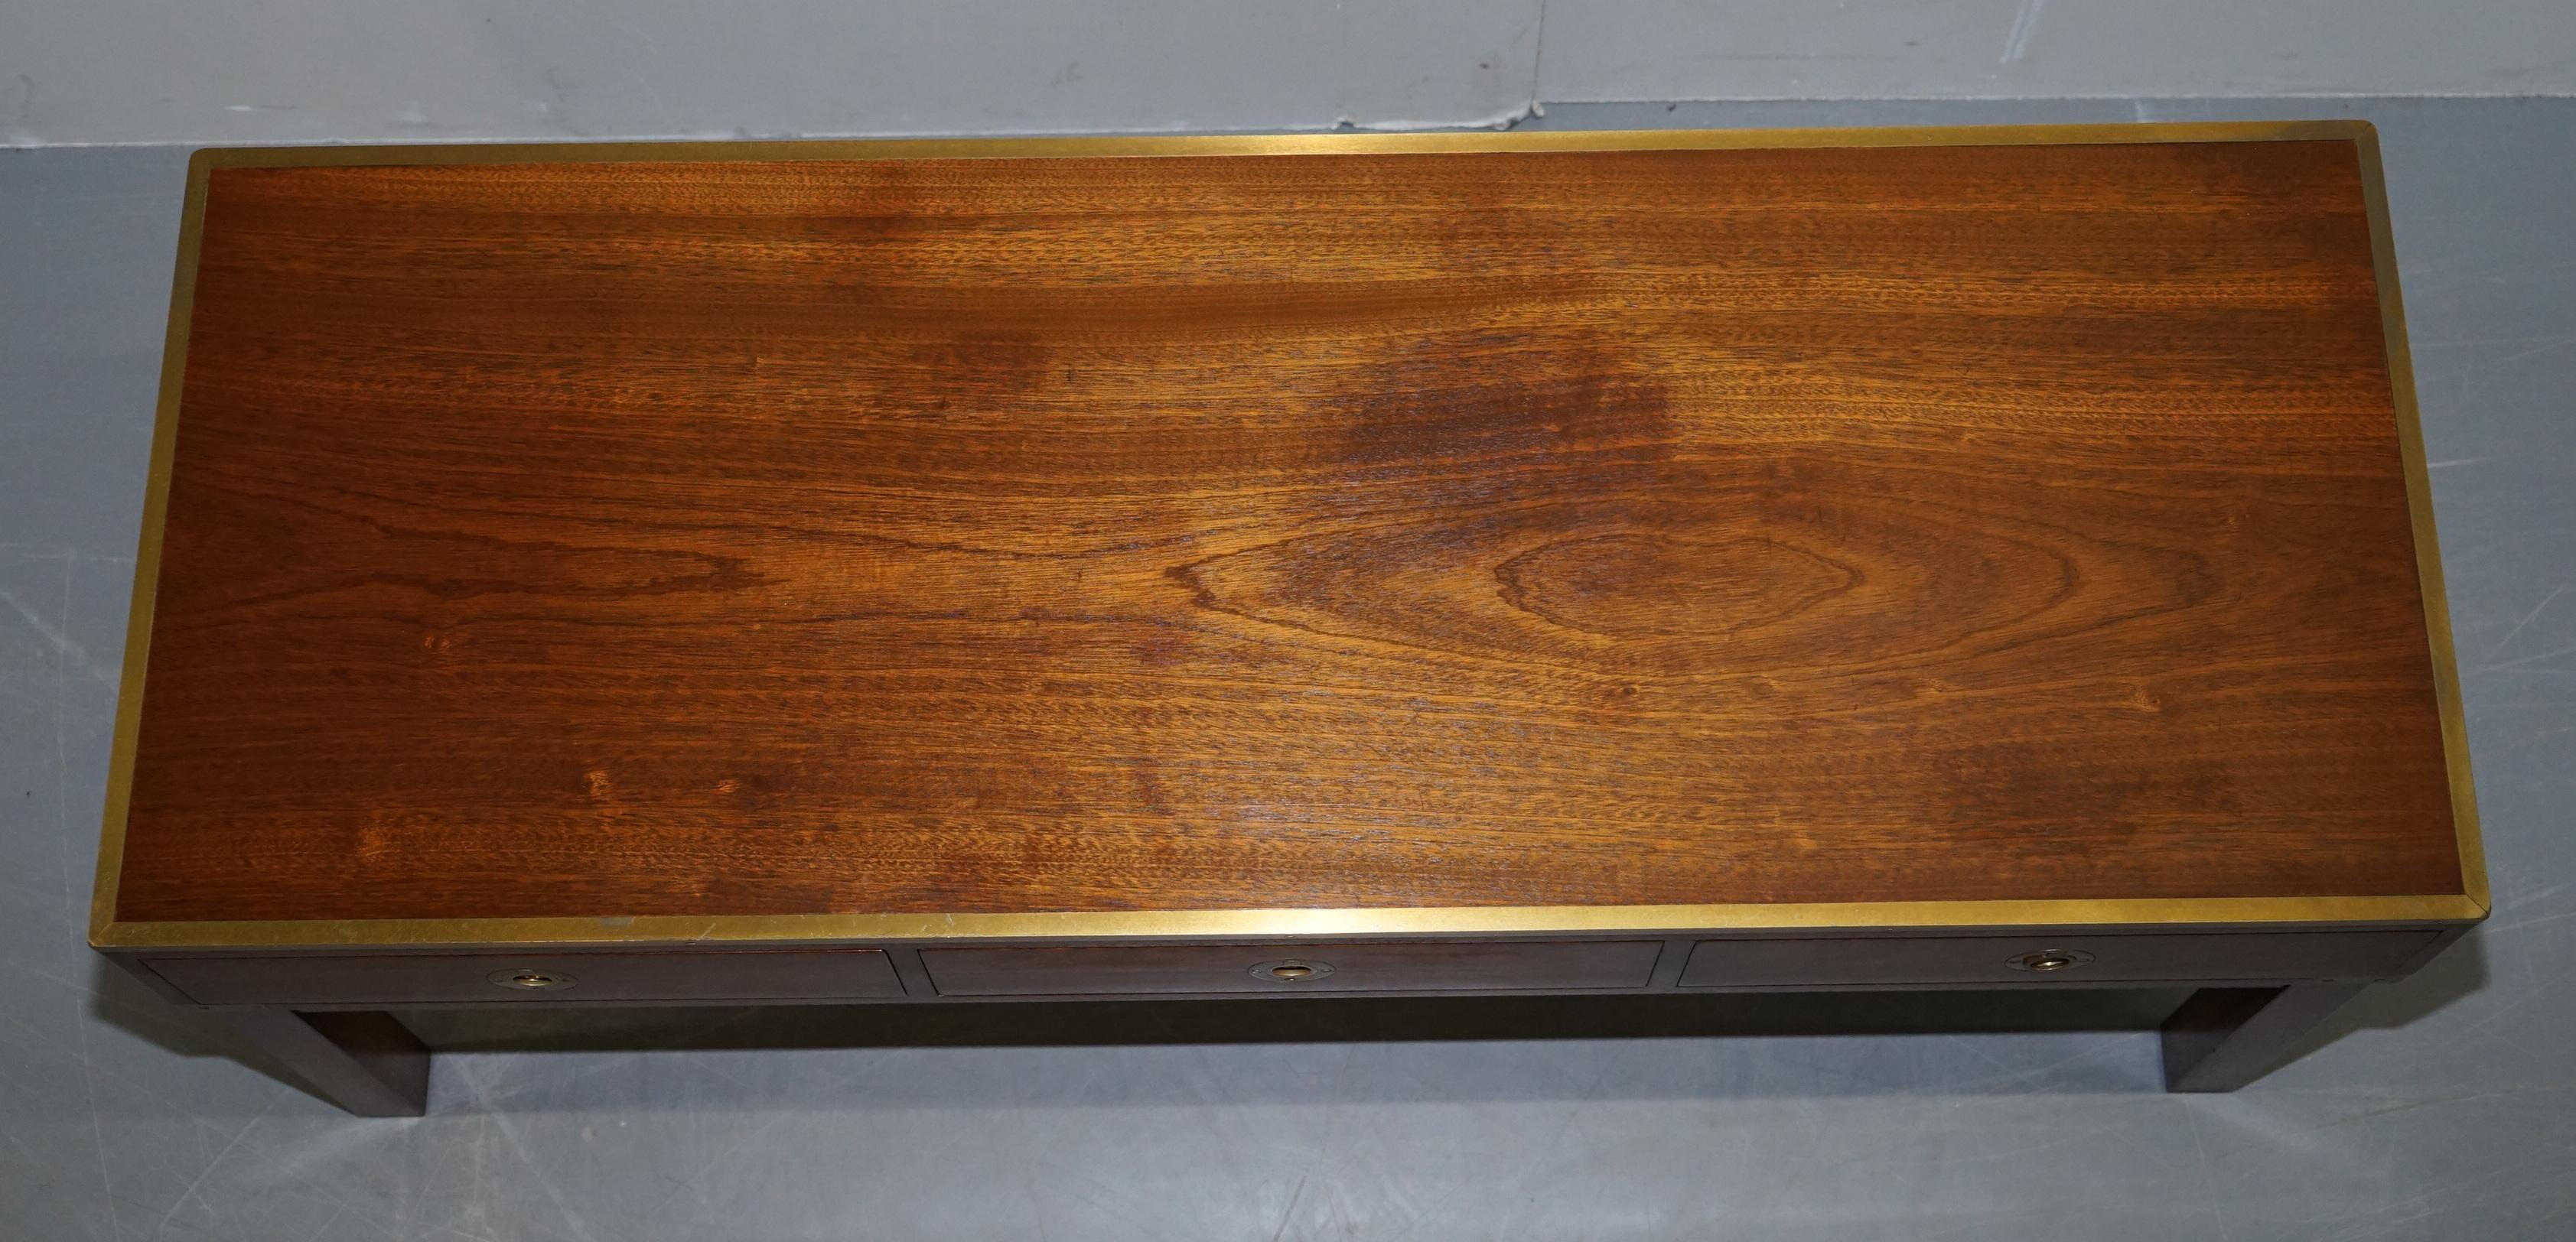 Harrods Kennedy Military Campaign Hardwood Coffee Table Part of Large Suite 1